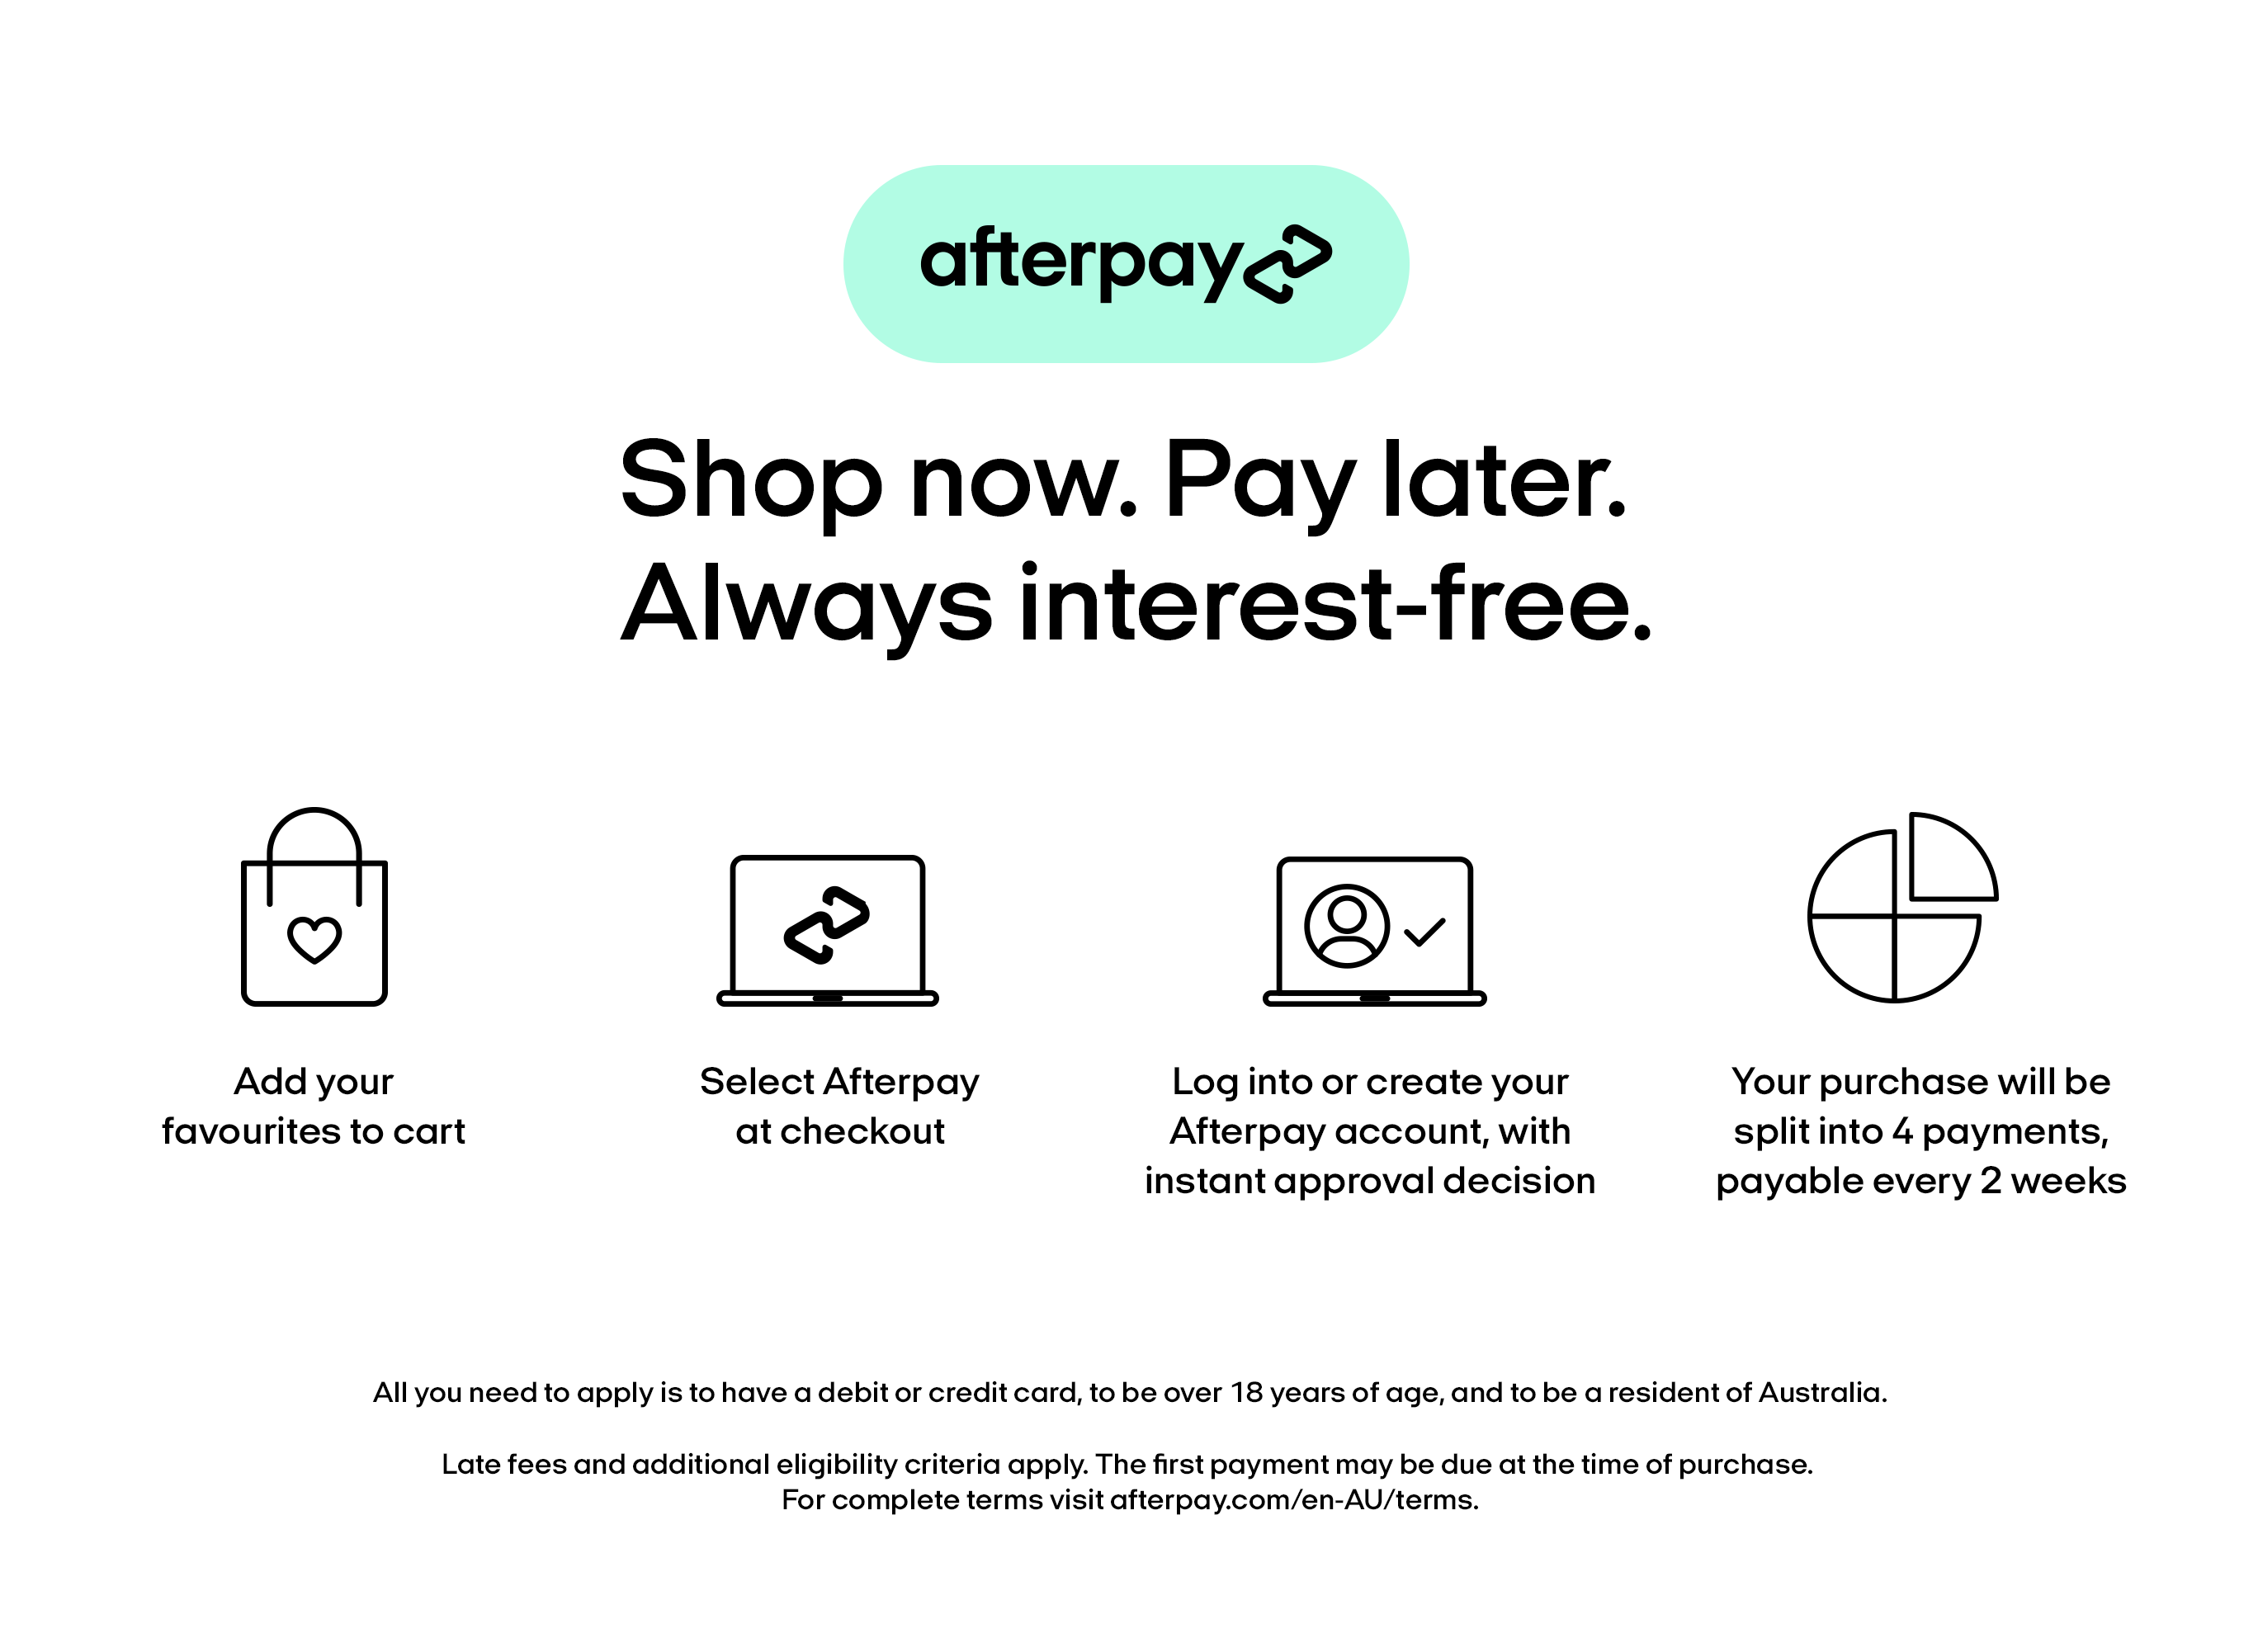 For Afterpay terms, go to afterpay.com/en-AU/terms